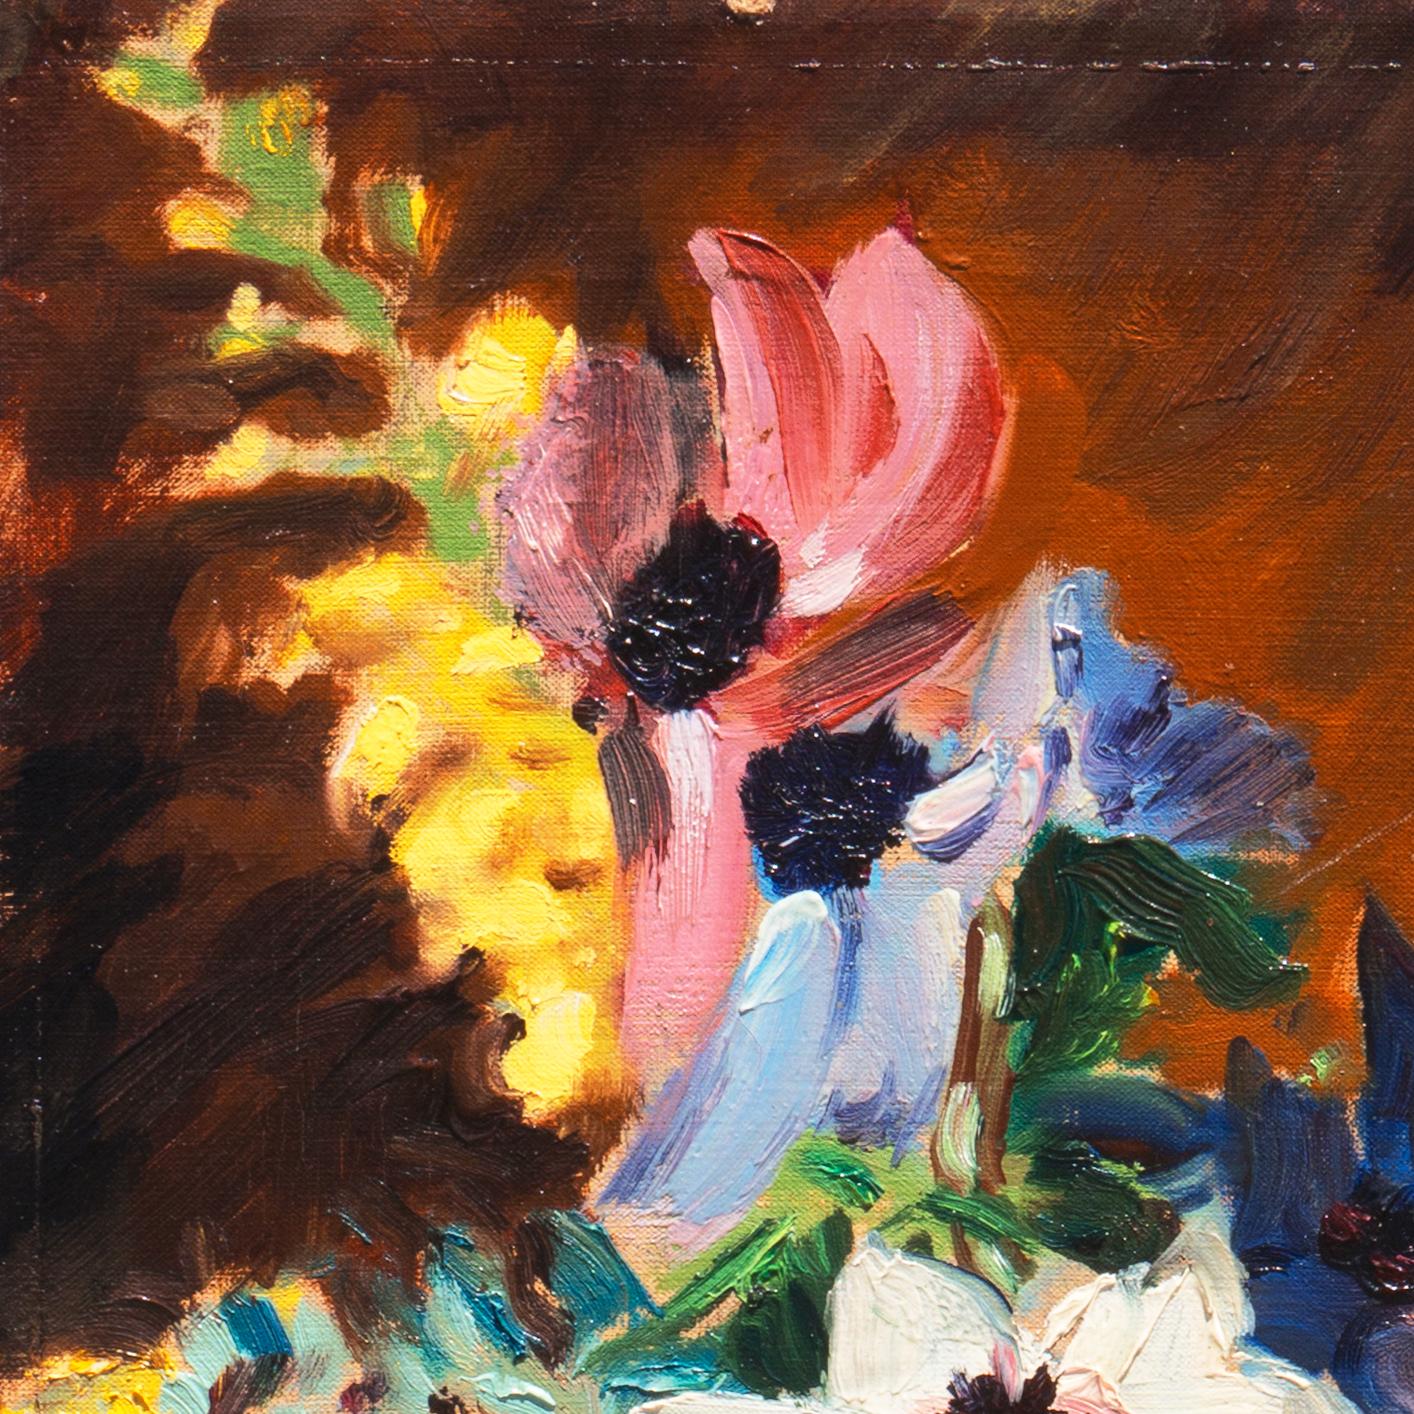 Signed lower right, 'Fletcher' (American, 20th century) and dated 1958.

A vibrant, mid-century Post-Impressionist still life showing a view of Bishop dahlias and yellow wildflowers contrasted against a variegated brown background. 